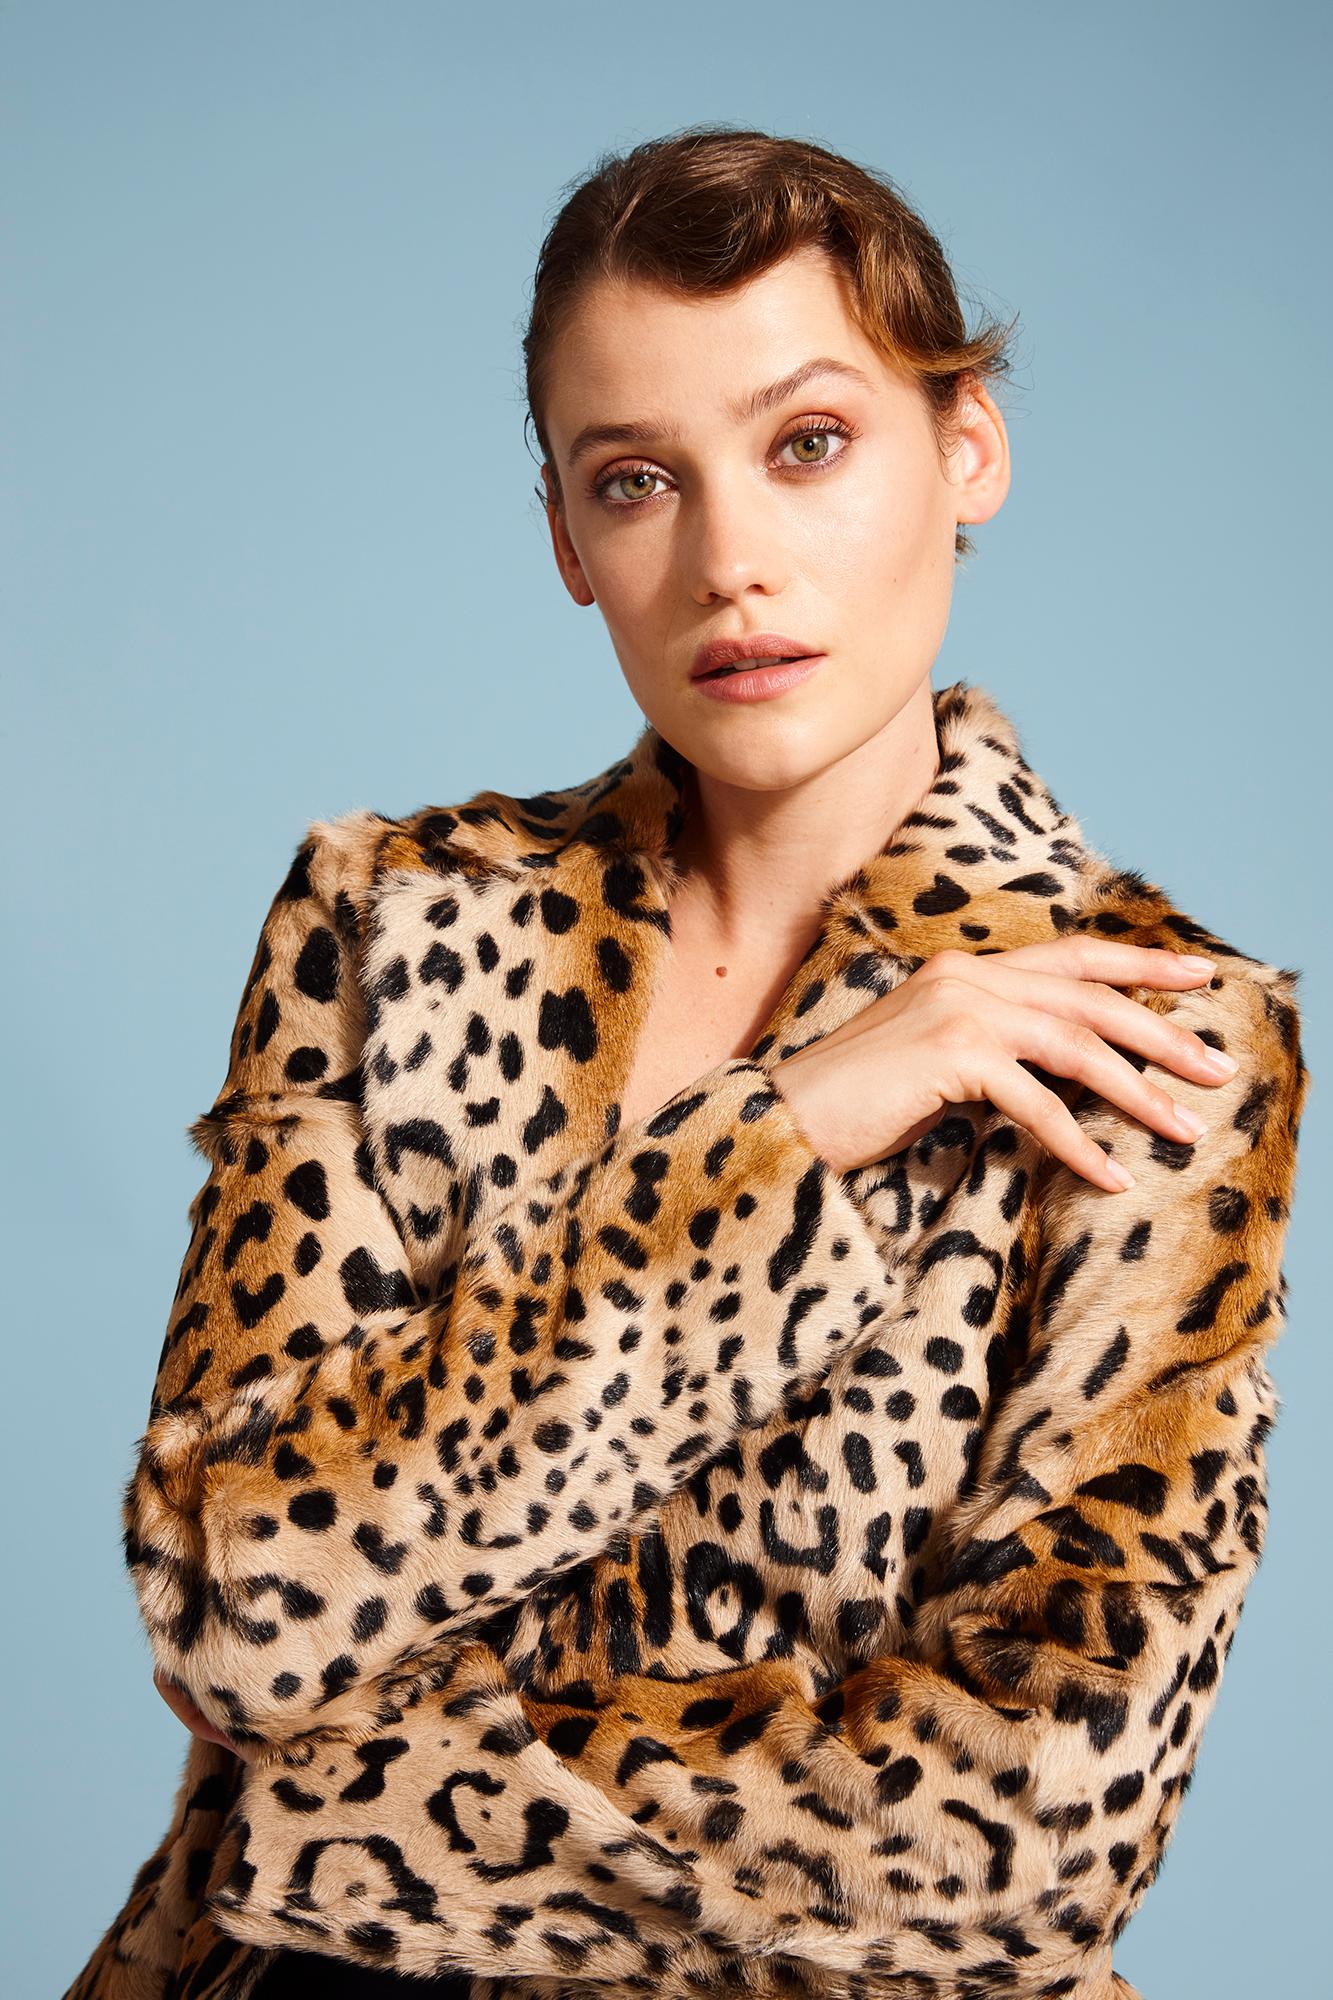 Verheyen London Leopard Print Coat in Natural Goat Hair Fur UK 10 - Brand New 
RRP Price £1,695

This Leopard print coat is Verheyen London’s classic staple for effortless style and glamour.
A coat for dressing up and down with jeans or a